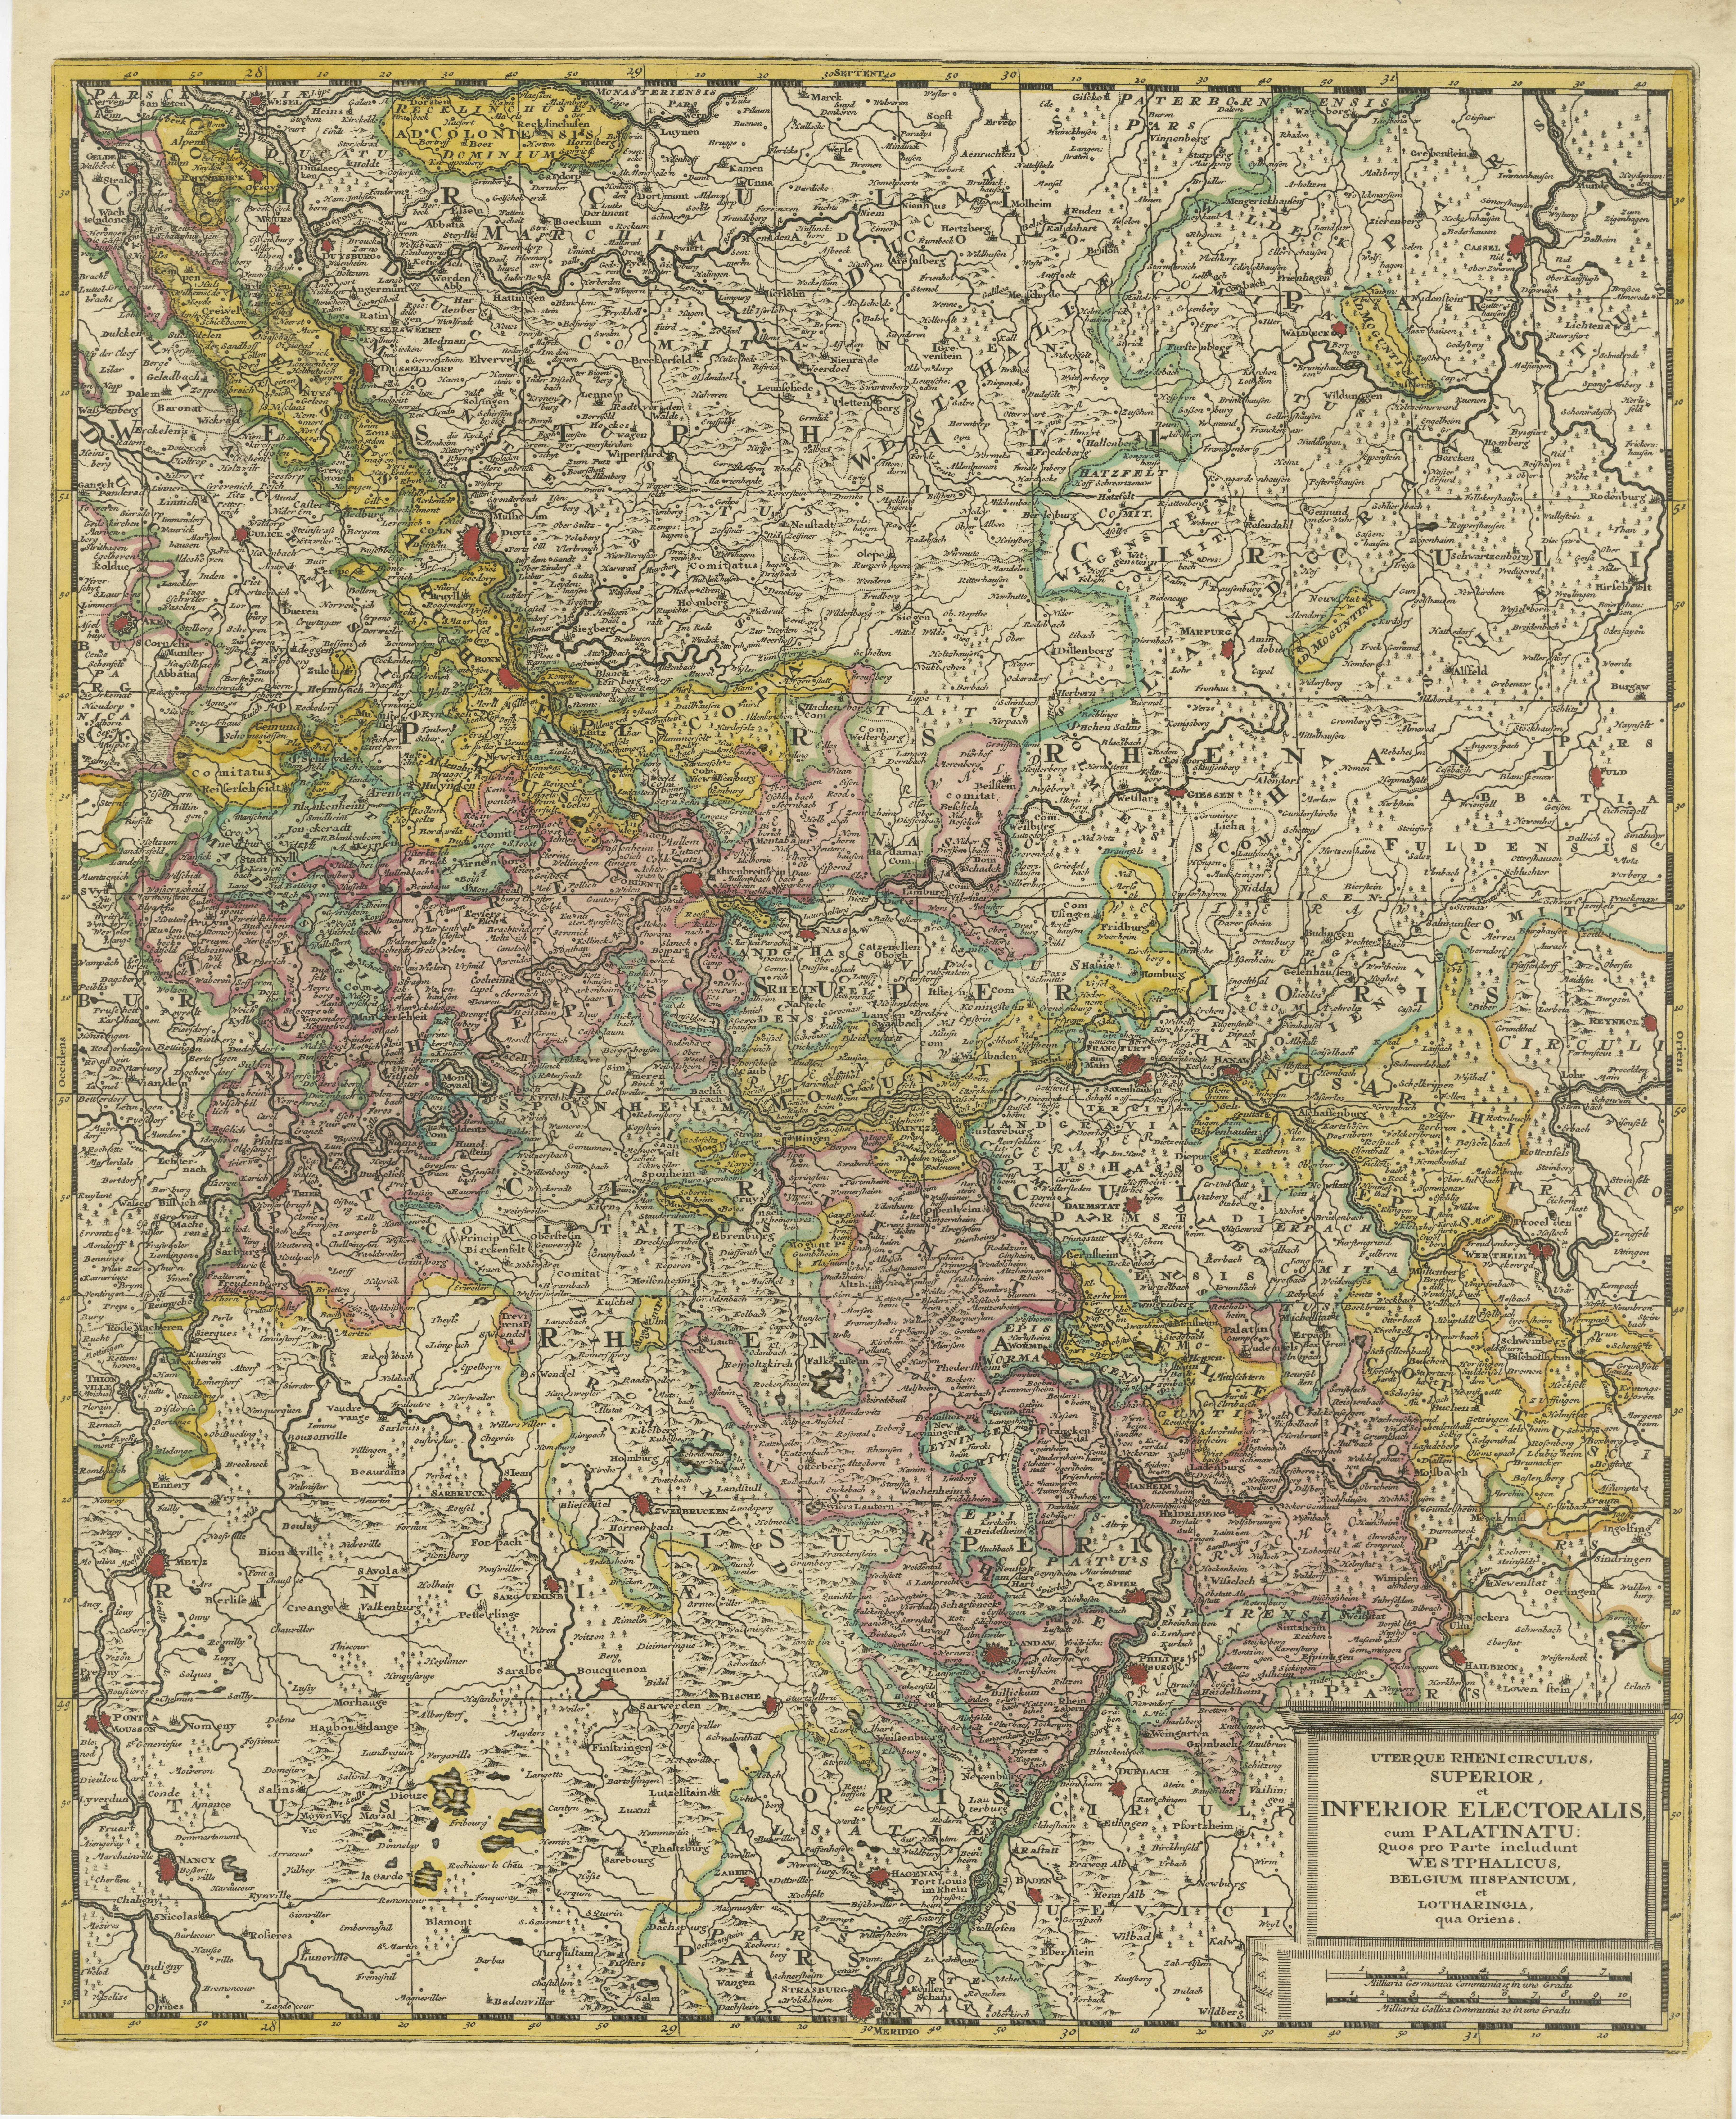 Antique map titled 'Uterque Rheni Circulus Superior (..)'. Fine old color map of the area centered on the Rhine River, from Strassbourg to Wesel and Duisburg, Germany. With cities highlighted in red. The map also covers a large stretch of the